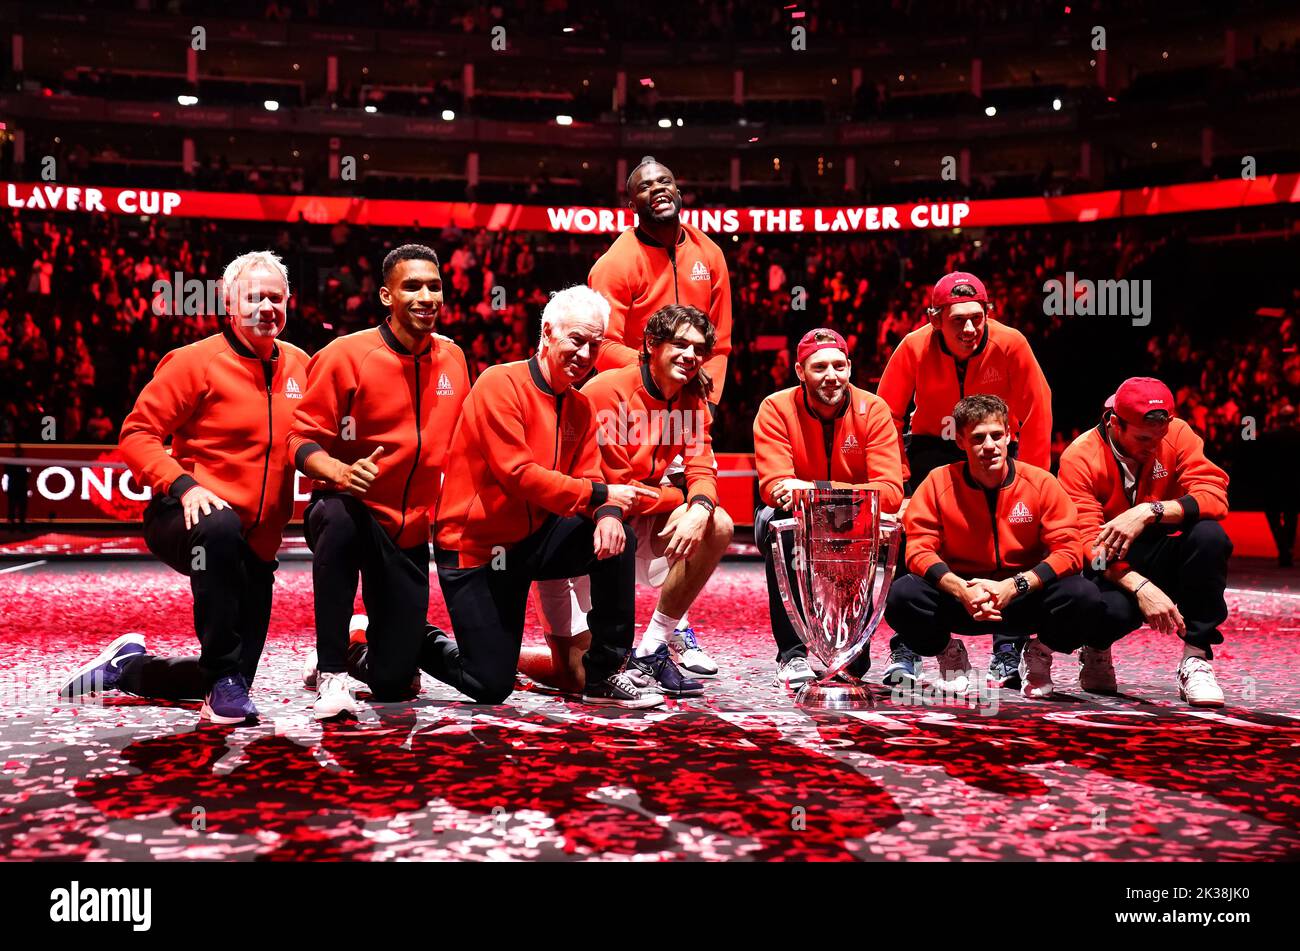 Team World (left to right) vice captain Patrick McEnroe, Felix Auger Aliassime, captain John McEnroe, Taylor Fritz, Frances Tiafoe, Jack Sock, Alex De Minaur, Diego Schwartzman and Tommy Paul as they celebrate with the trophy after winning the Laver Cup on day three of the Laver Cup at the O2 Arena, London. Picture date: Sunday September 25, 2022. Stock Photo